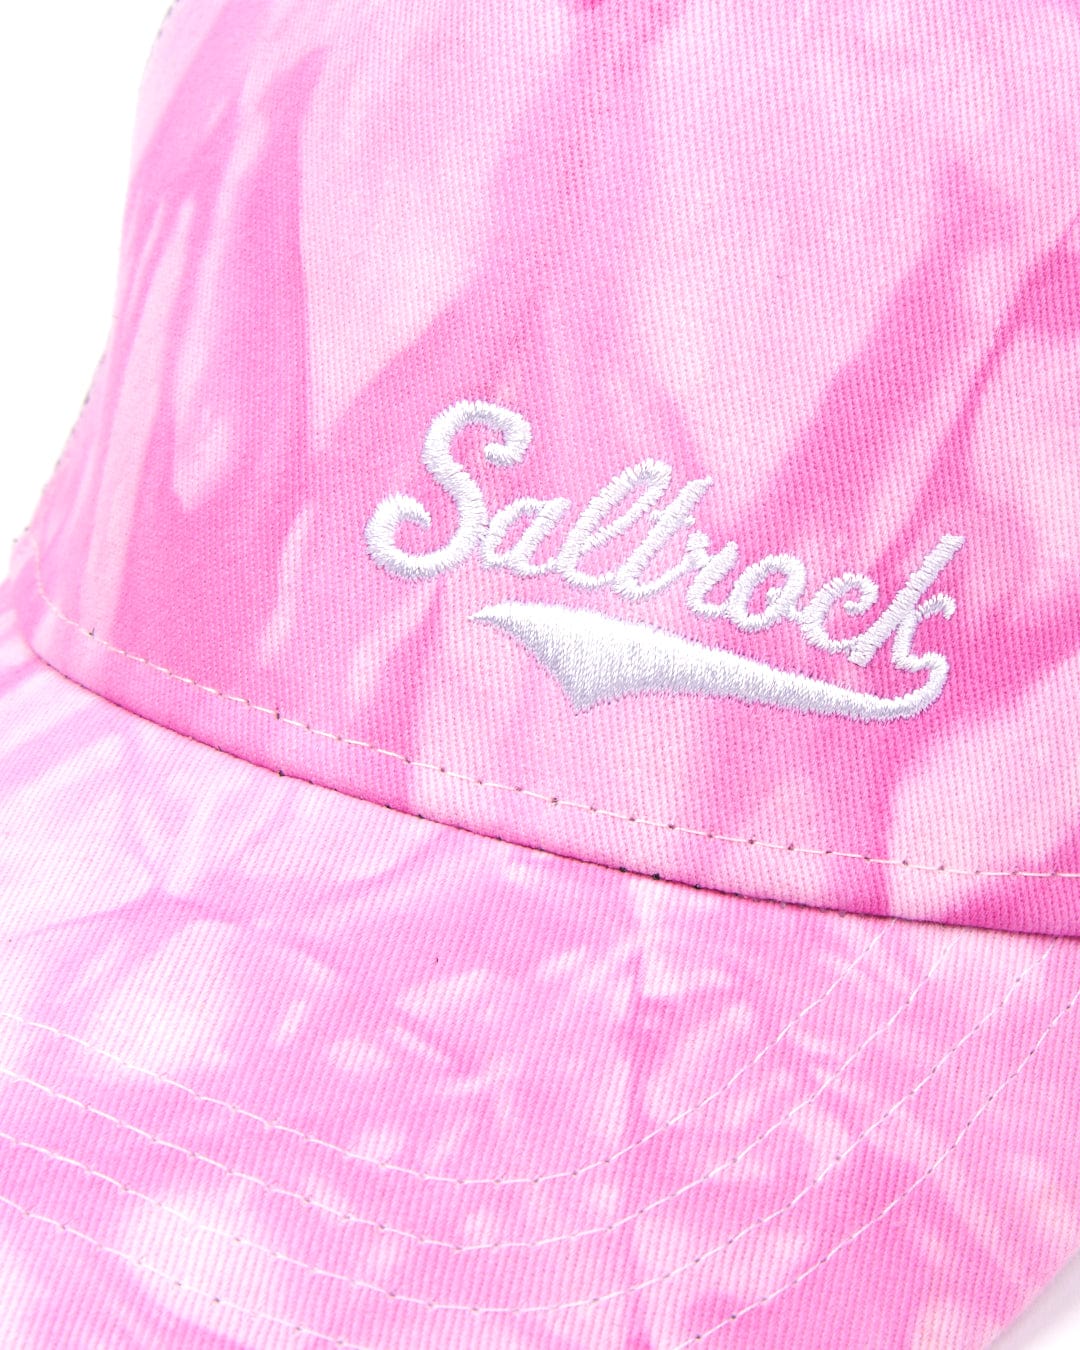 Close-up of a Swifty Trucker Cap - Pink branded Saltrock with tie-dye print.